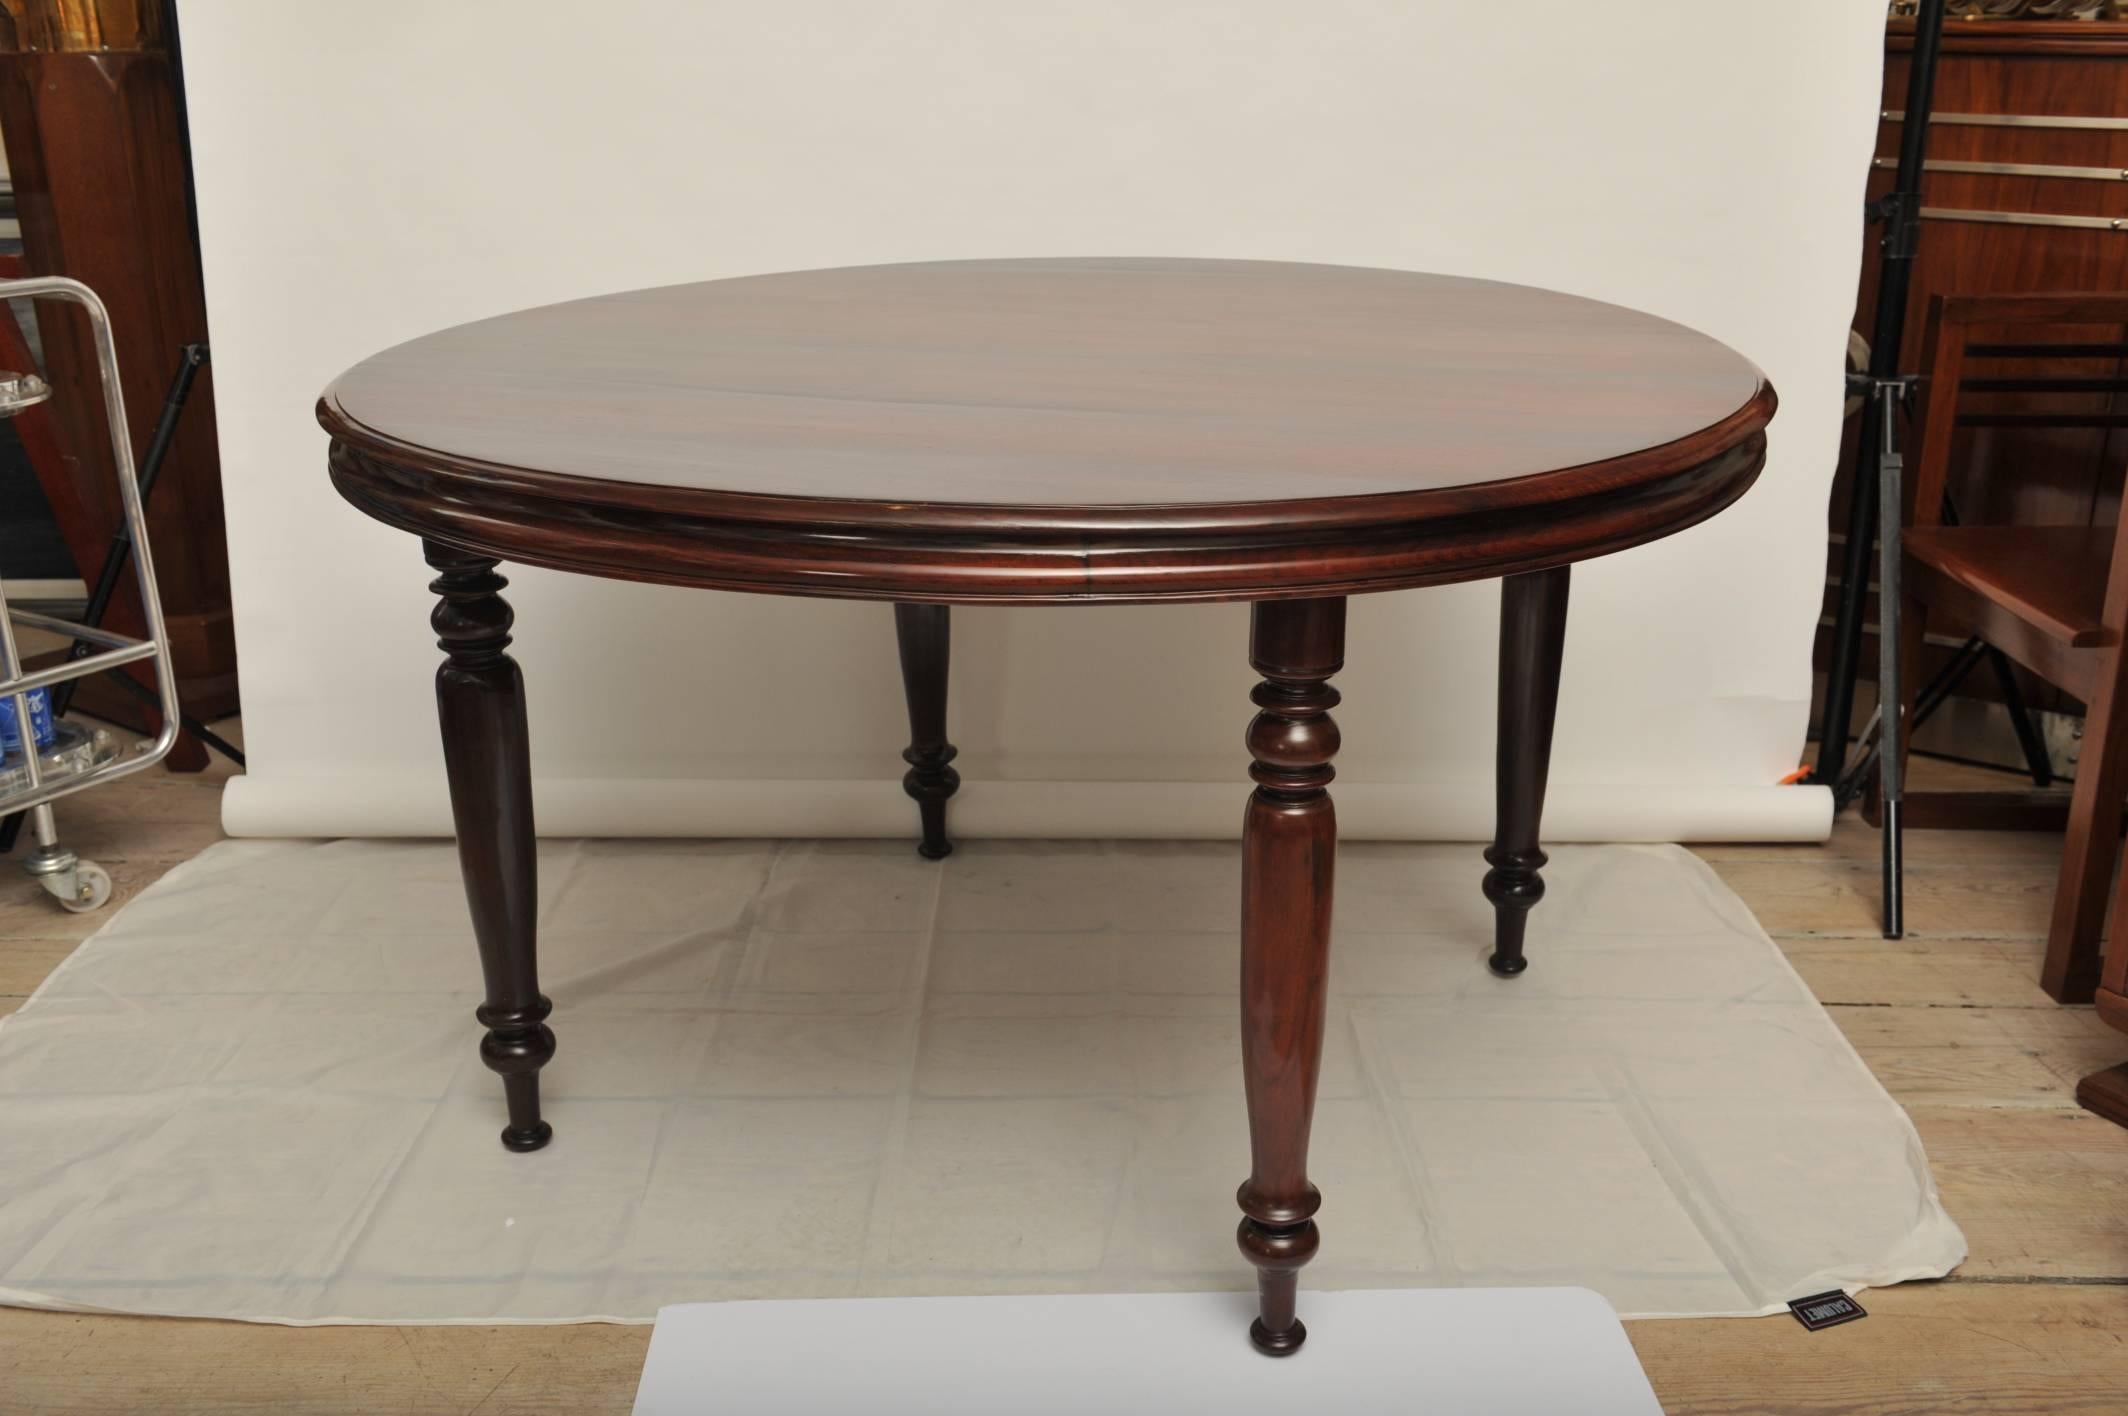 Elegant and rare British Campaign solid wood dining table. Reeded edges and turned legs, which unscrew from underneath the tabletop for easier transport-- typical of the Campaign pieces, designed to store and travel. Refinished.  Round dining tables